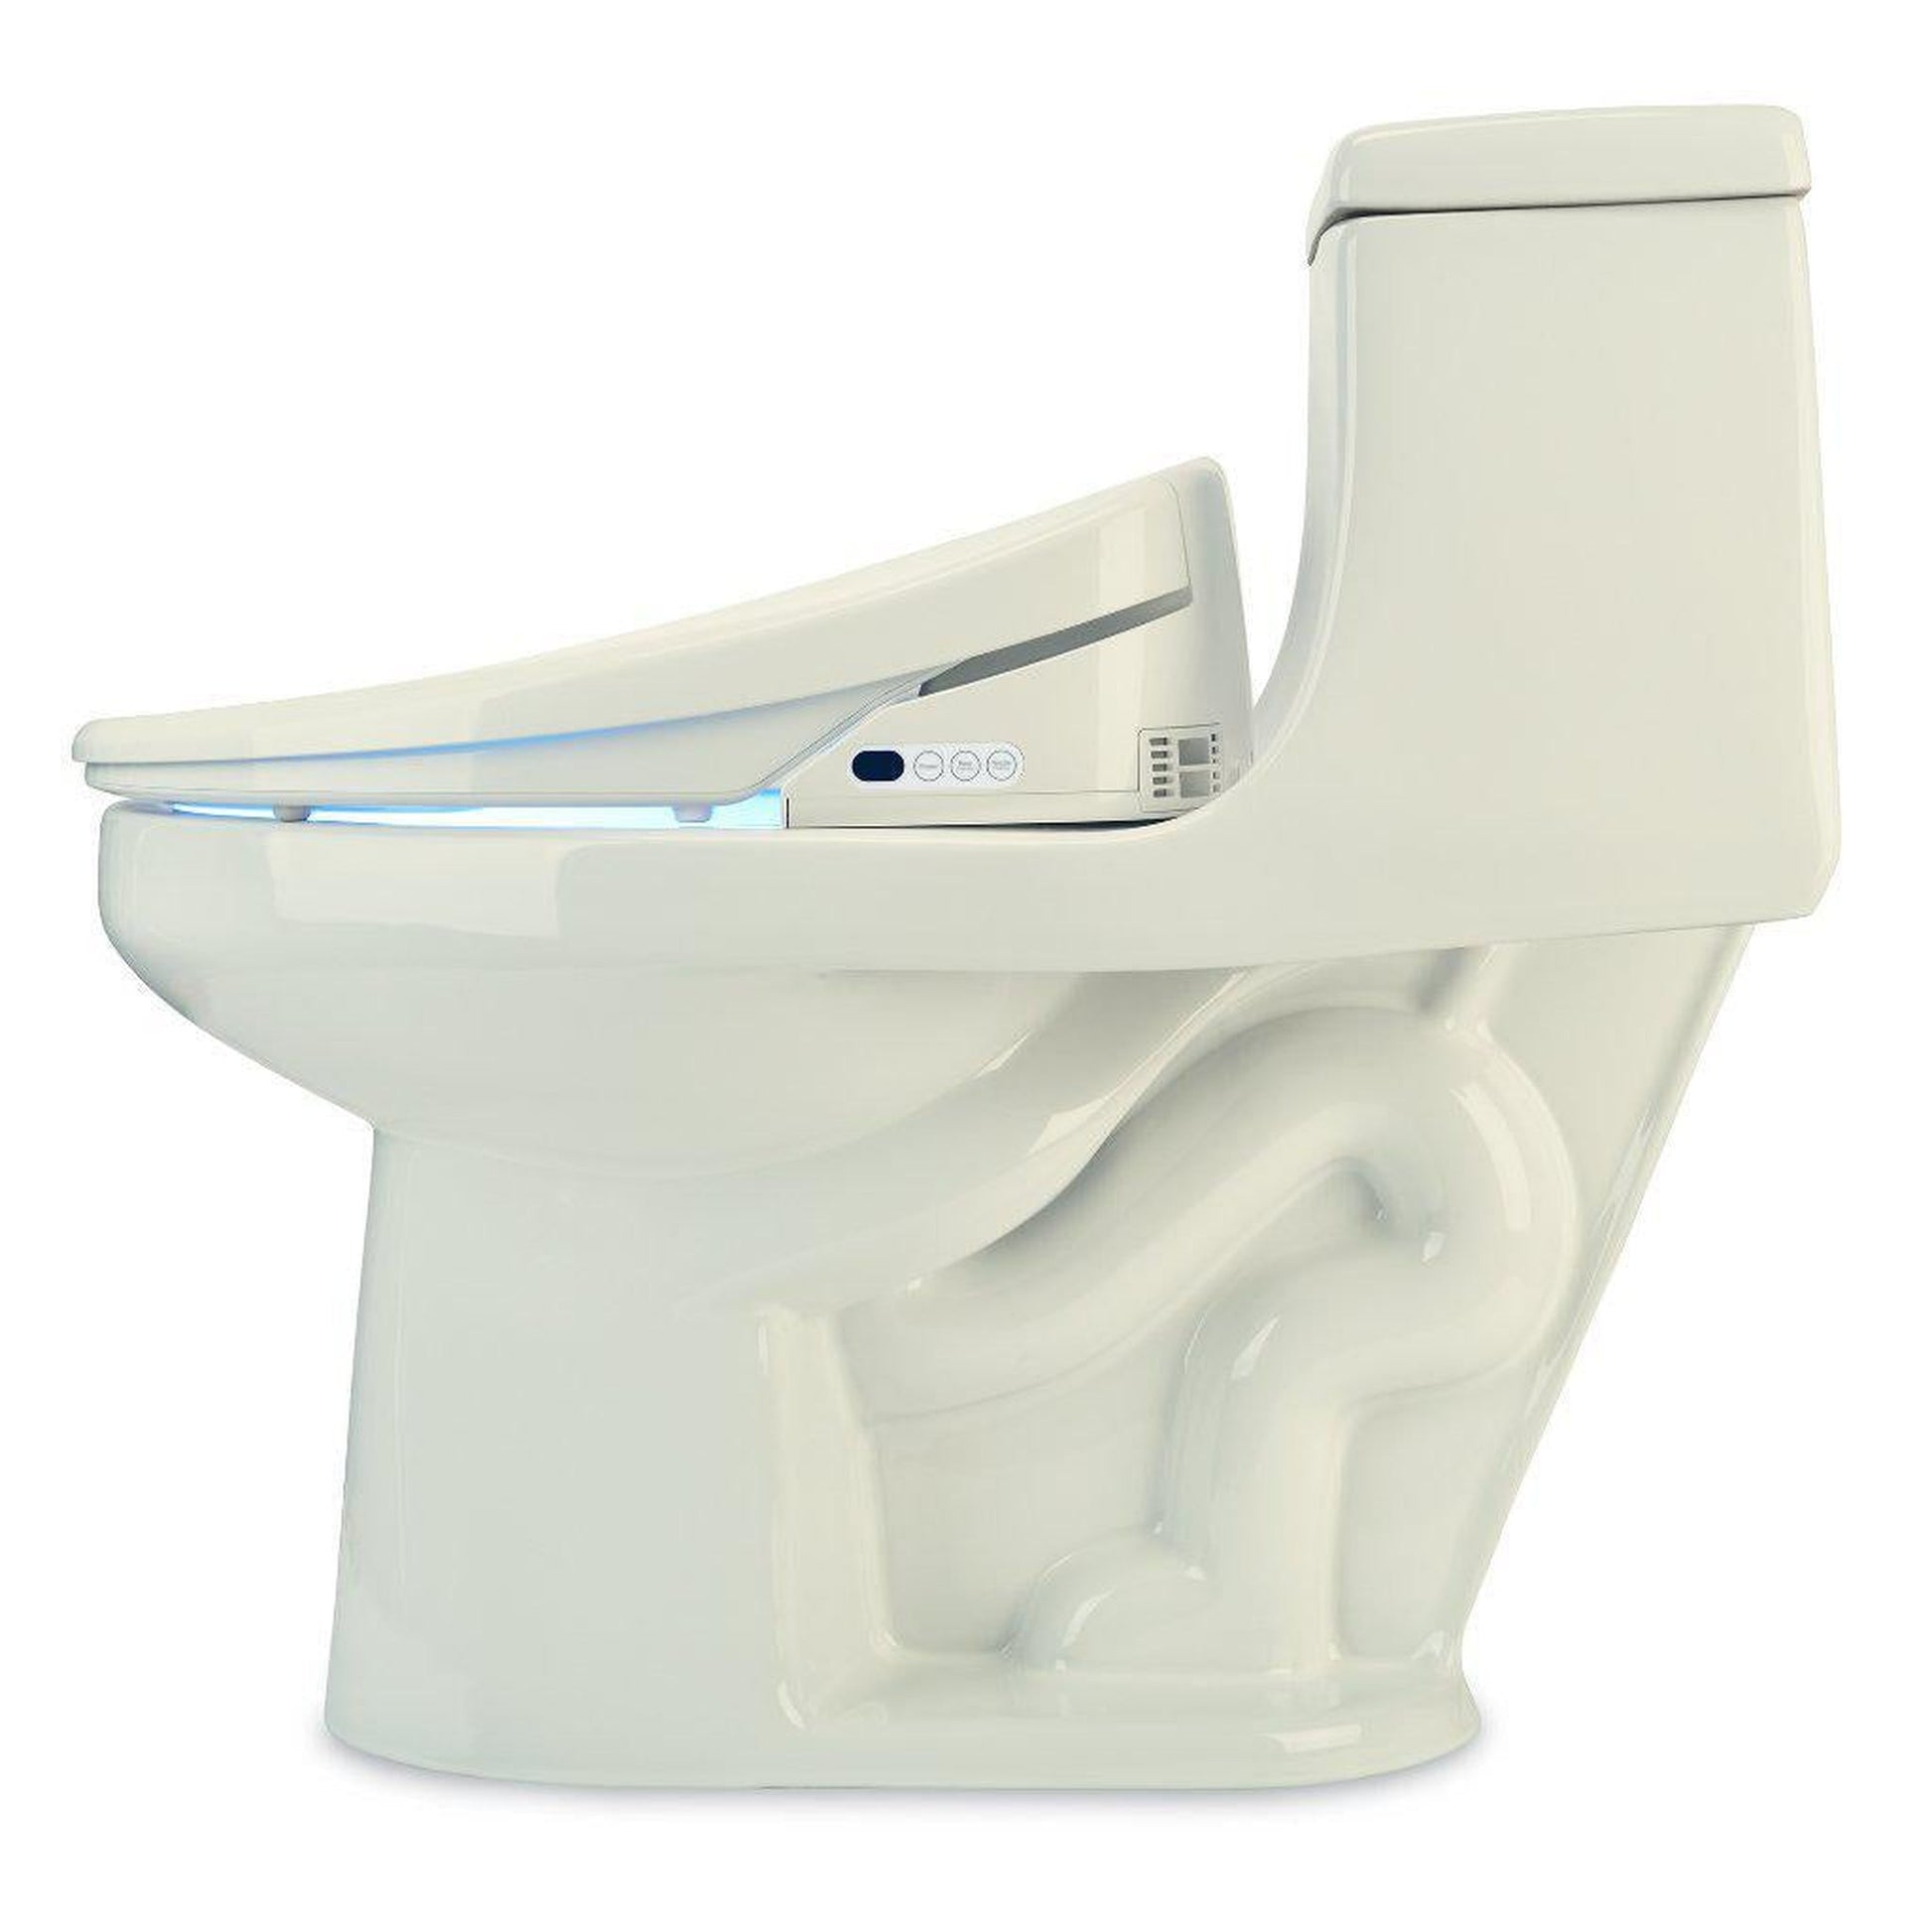 Brondell Swash 1400 20.43" Biscuit Elongated Electric Luxury Bidet Toilet Seat With Wireless Remote Control